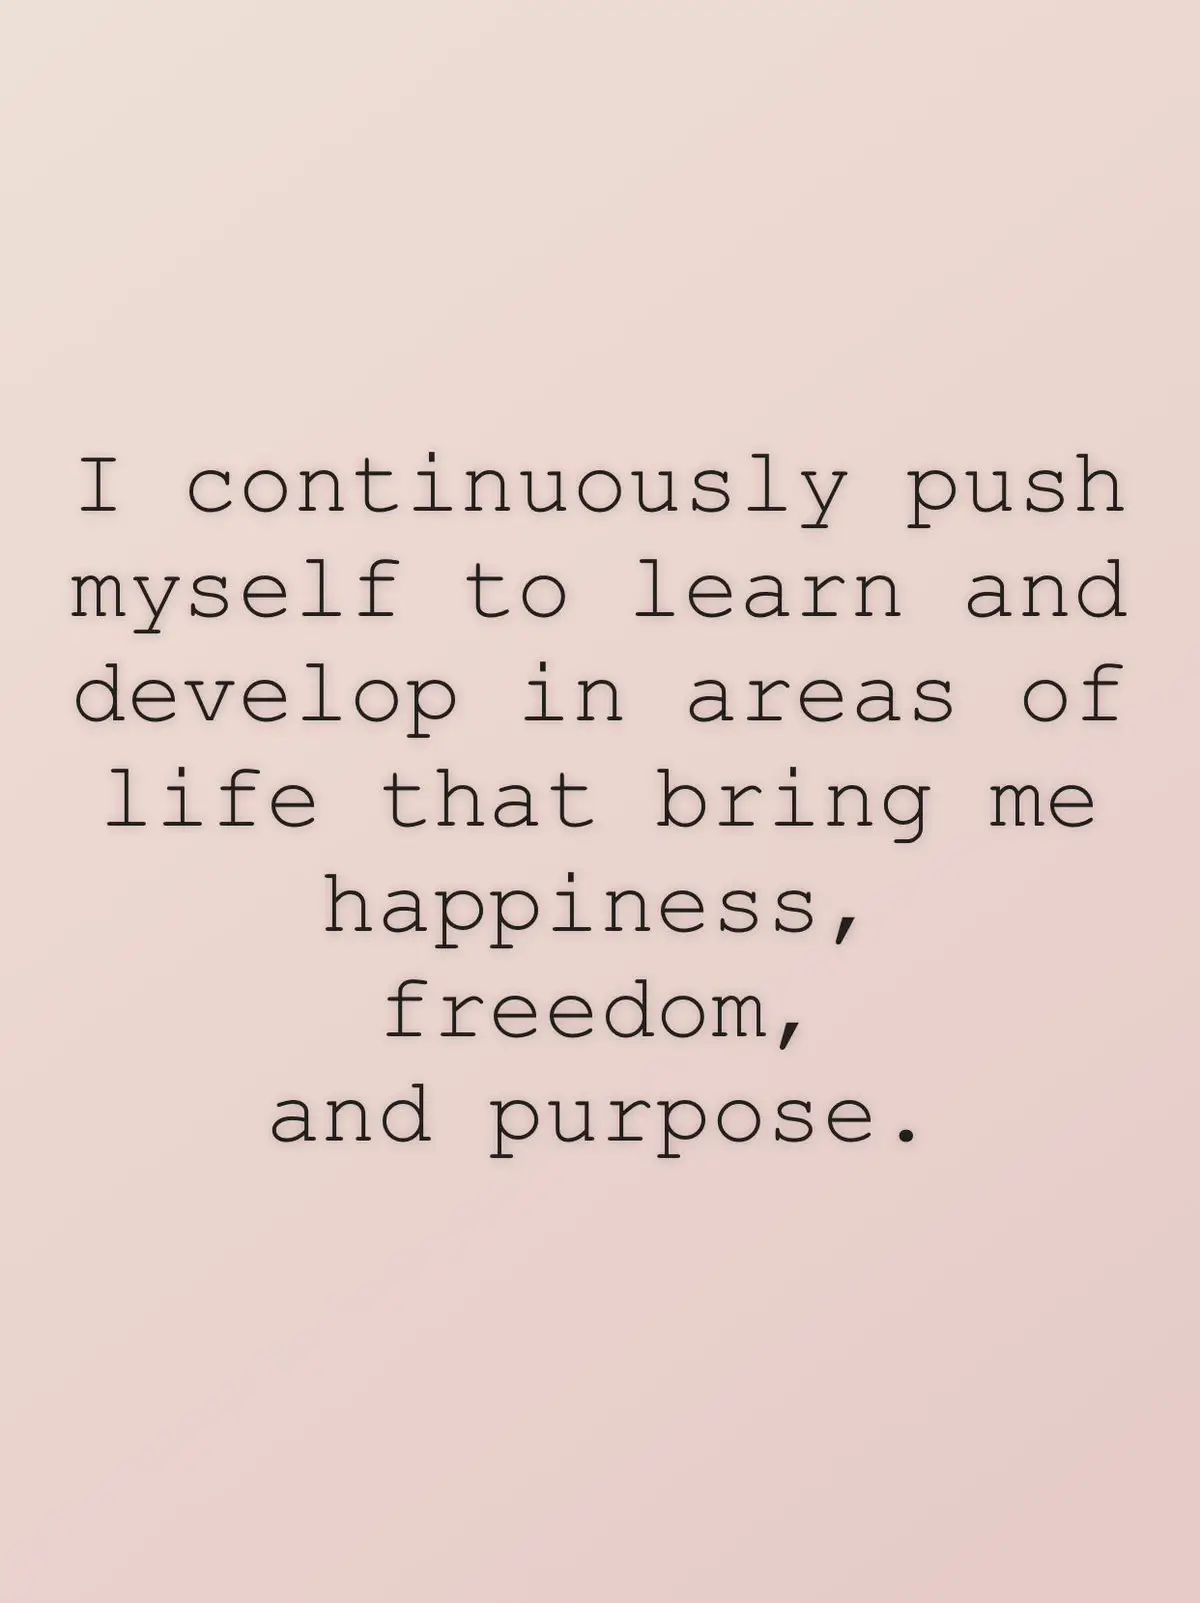  A quote about pushing oneself to learn and develop in areas of life that bring happiness, freedom, and purpose.